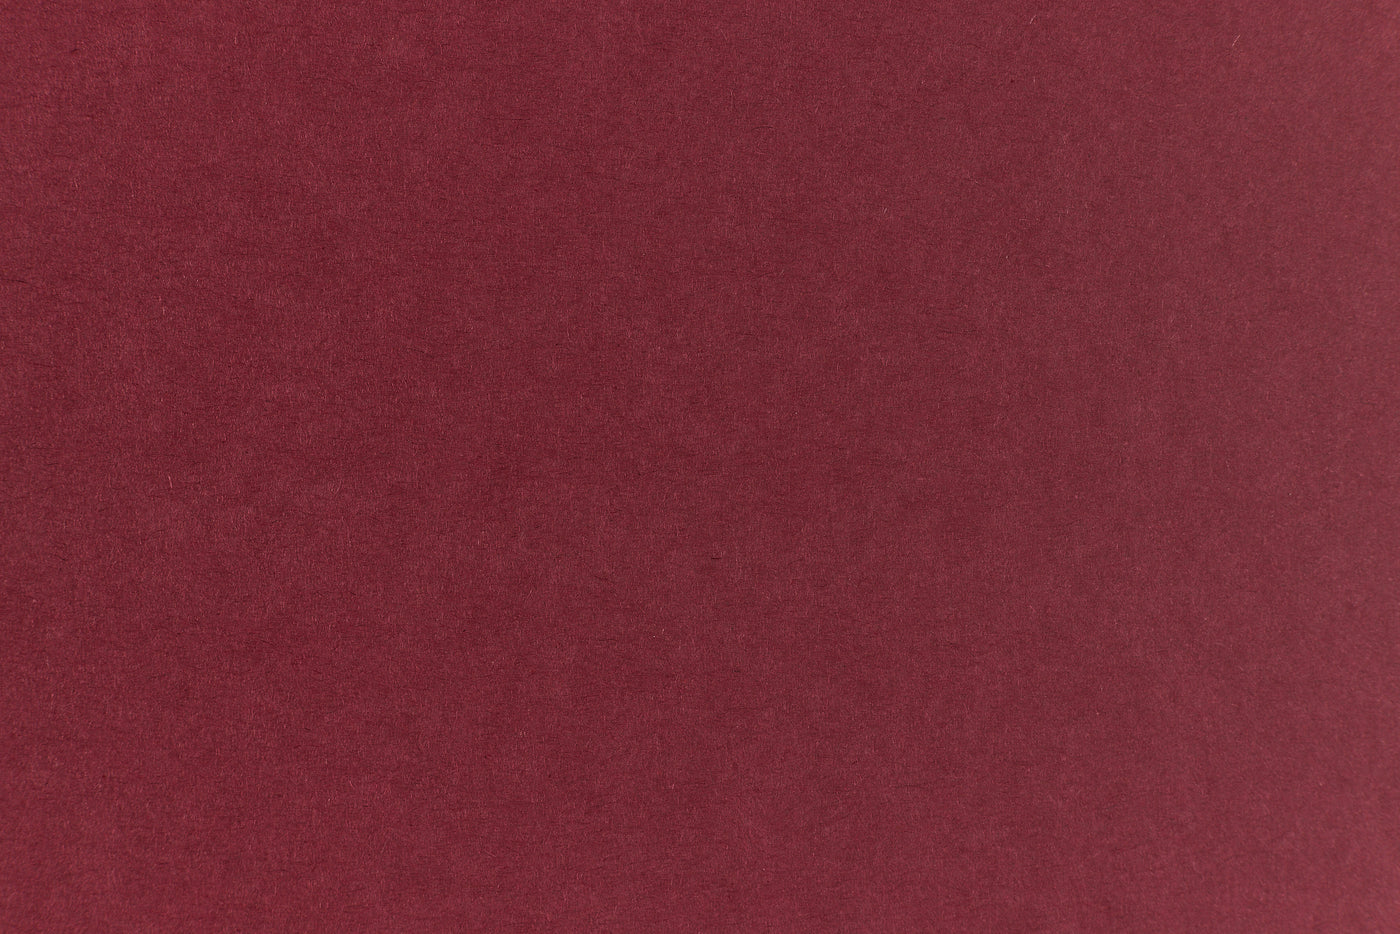 Deep, rich red crafting paper viewed in detail. 